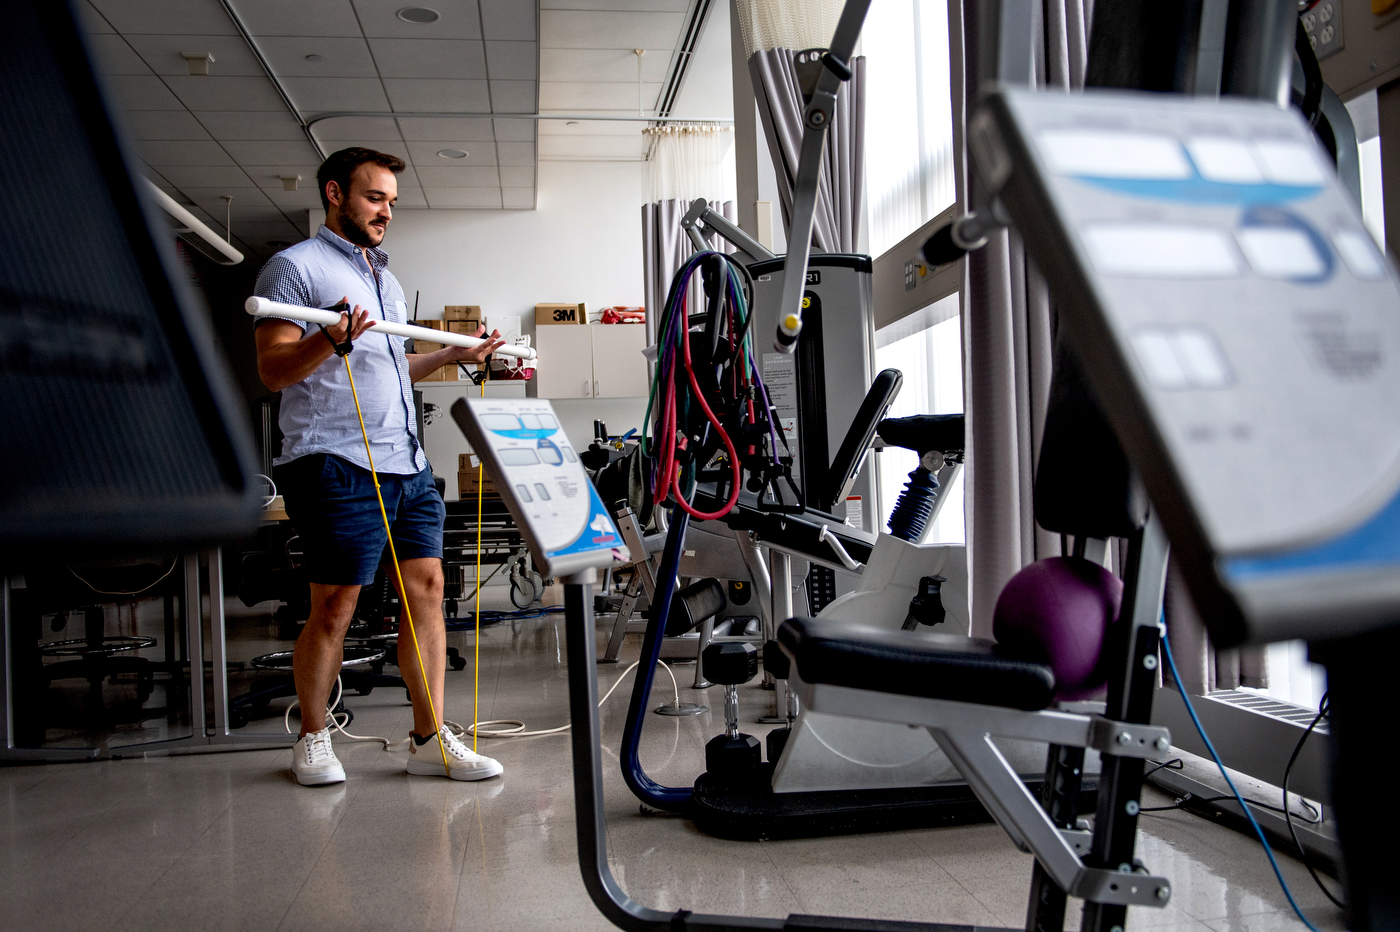 Graduate student Diego Arguello is working on a study funded by the National Institute of Aging to help improve and sustain physical activity and fitness in older adults using AI.